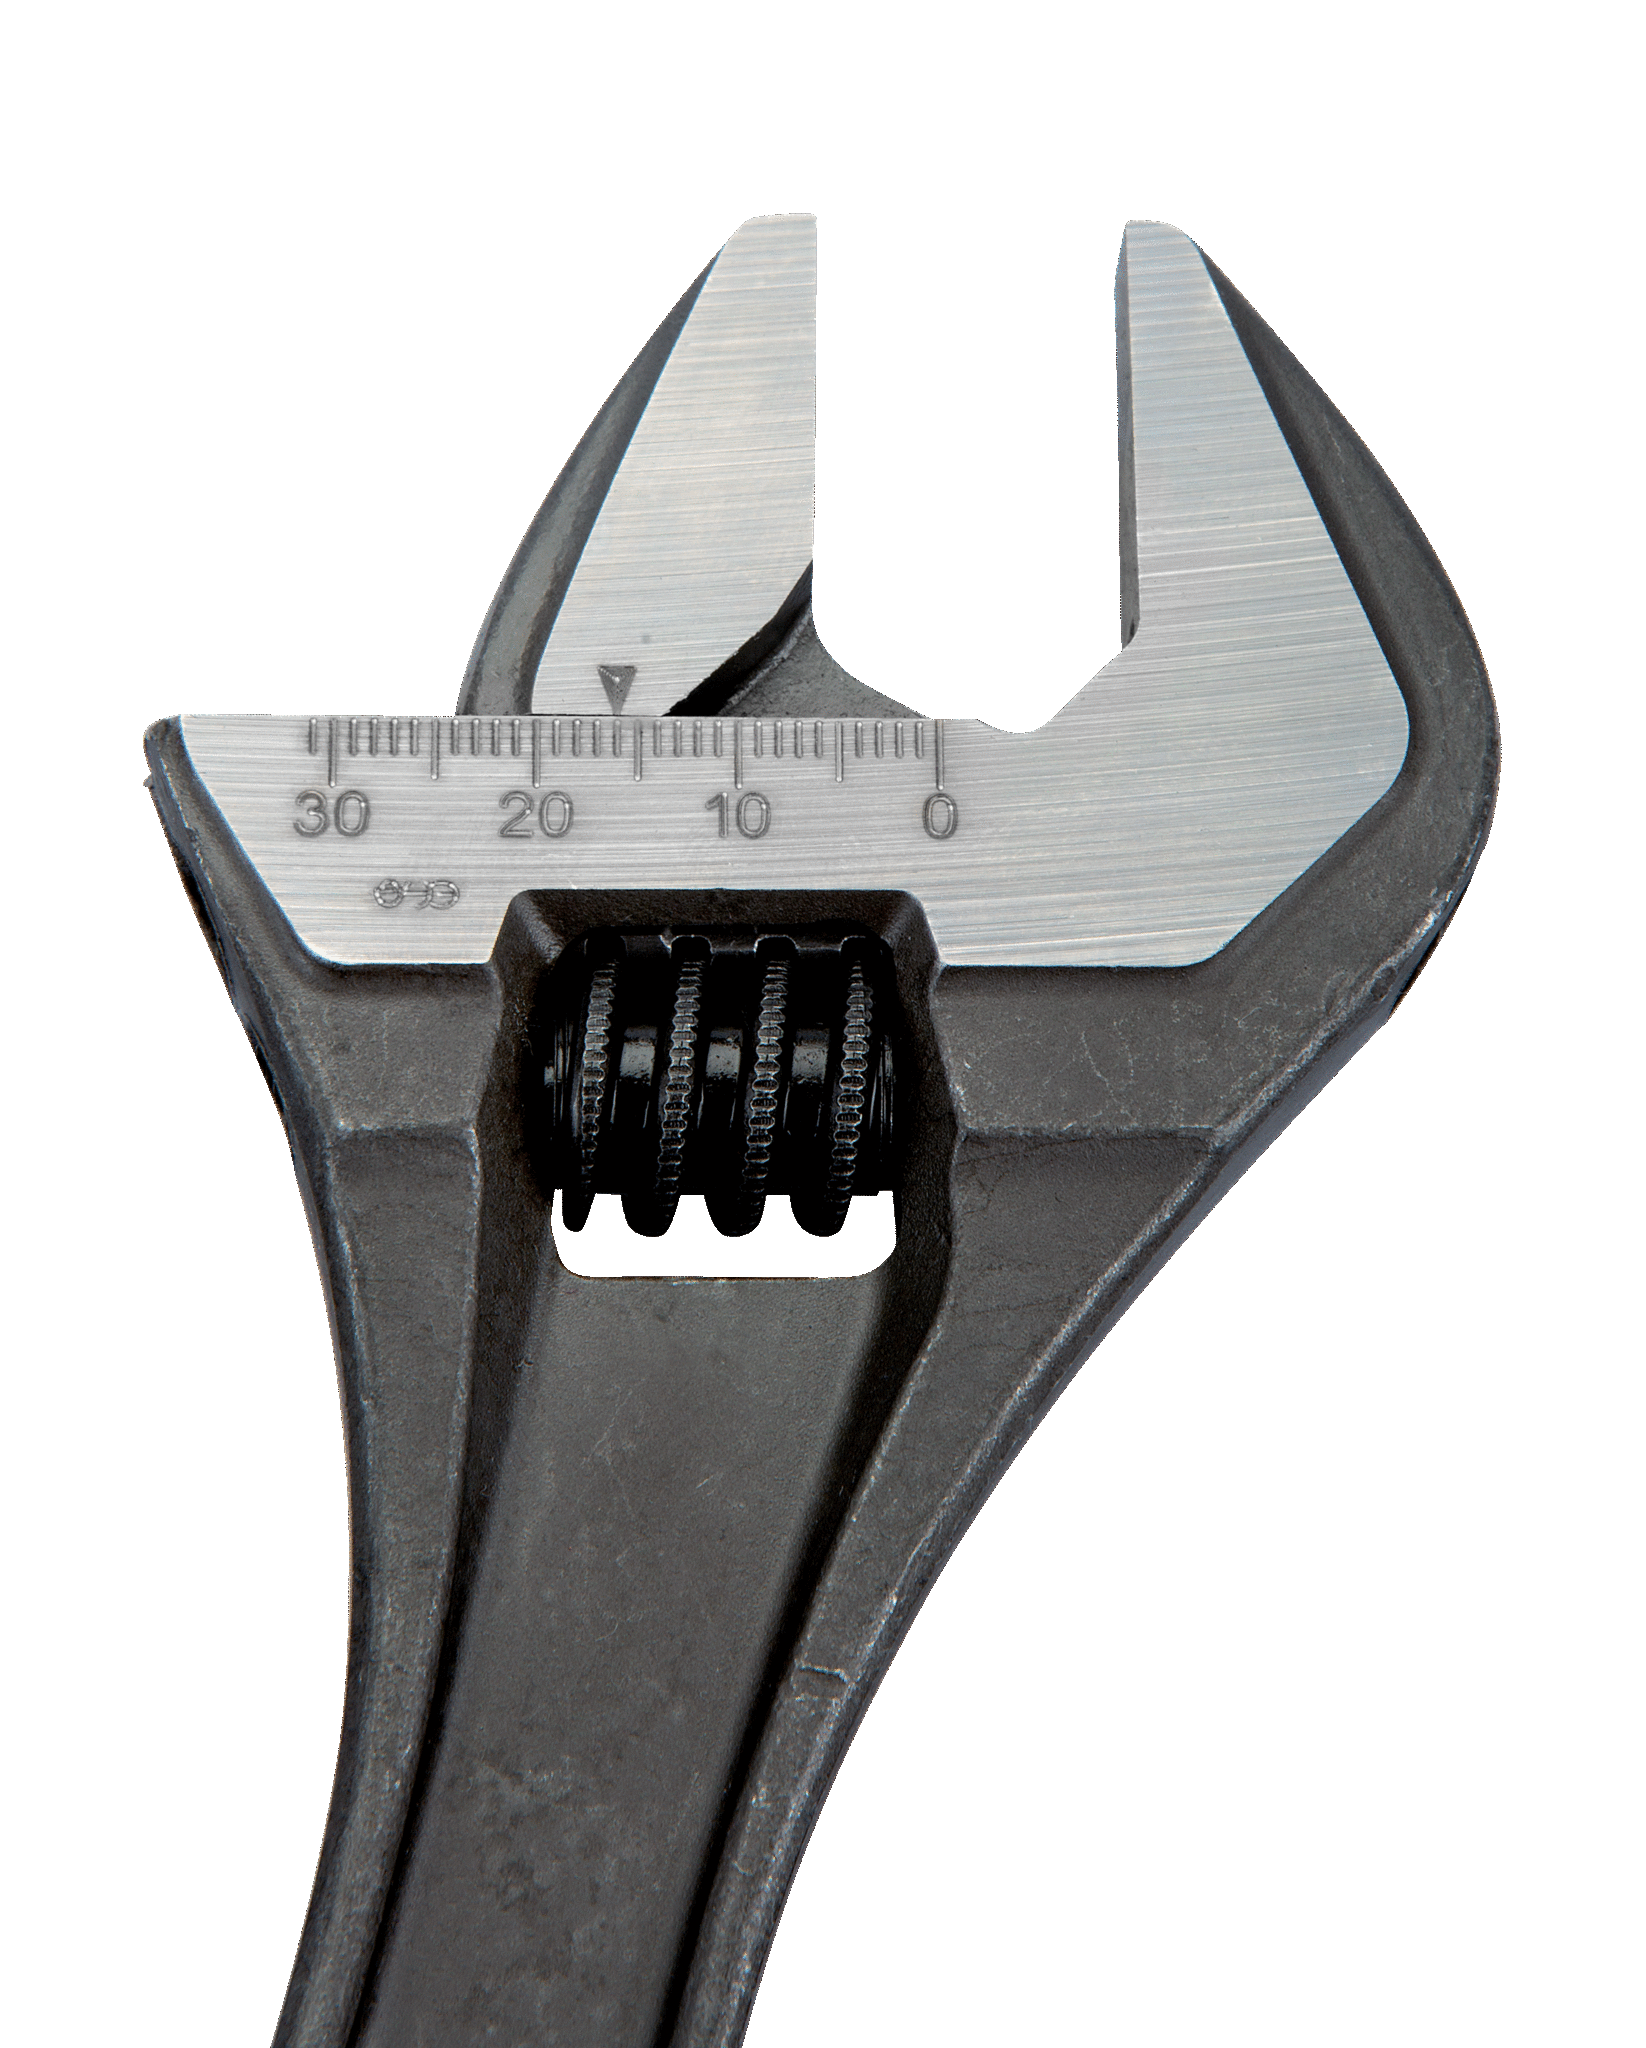 Central Nut Adjustable Wrenches with Phosphate Finish 325mm - 8074 by Bahco